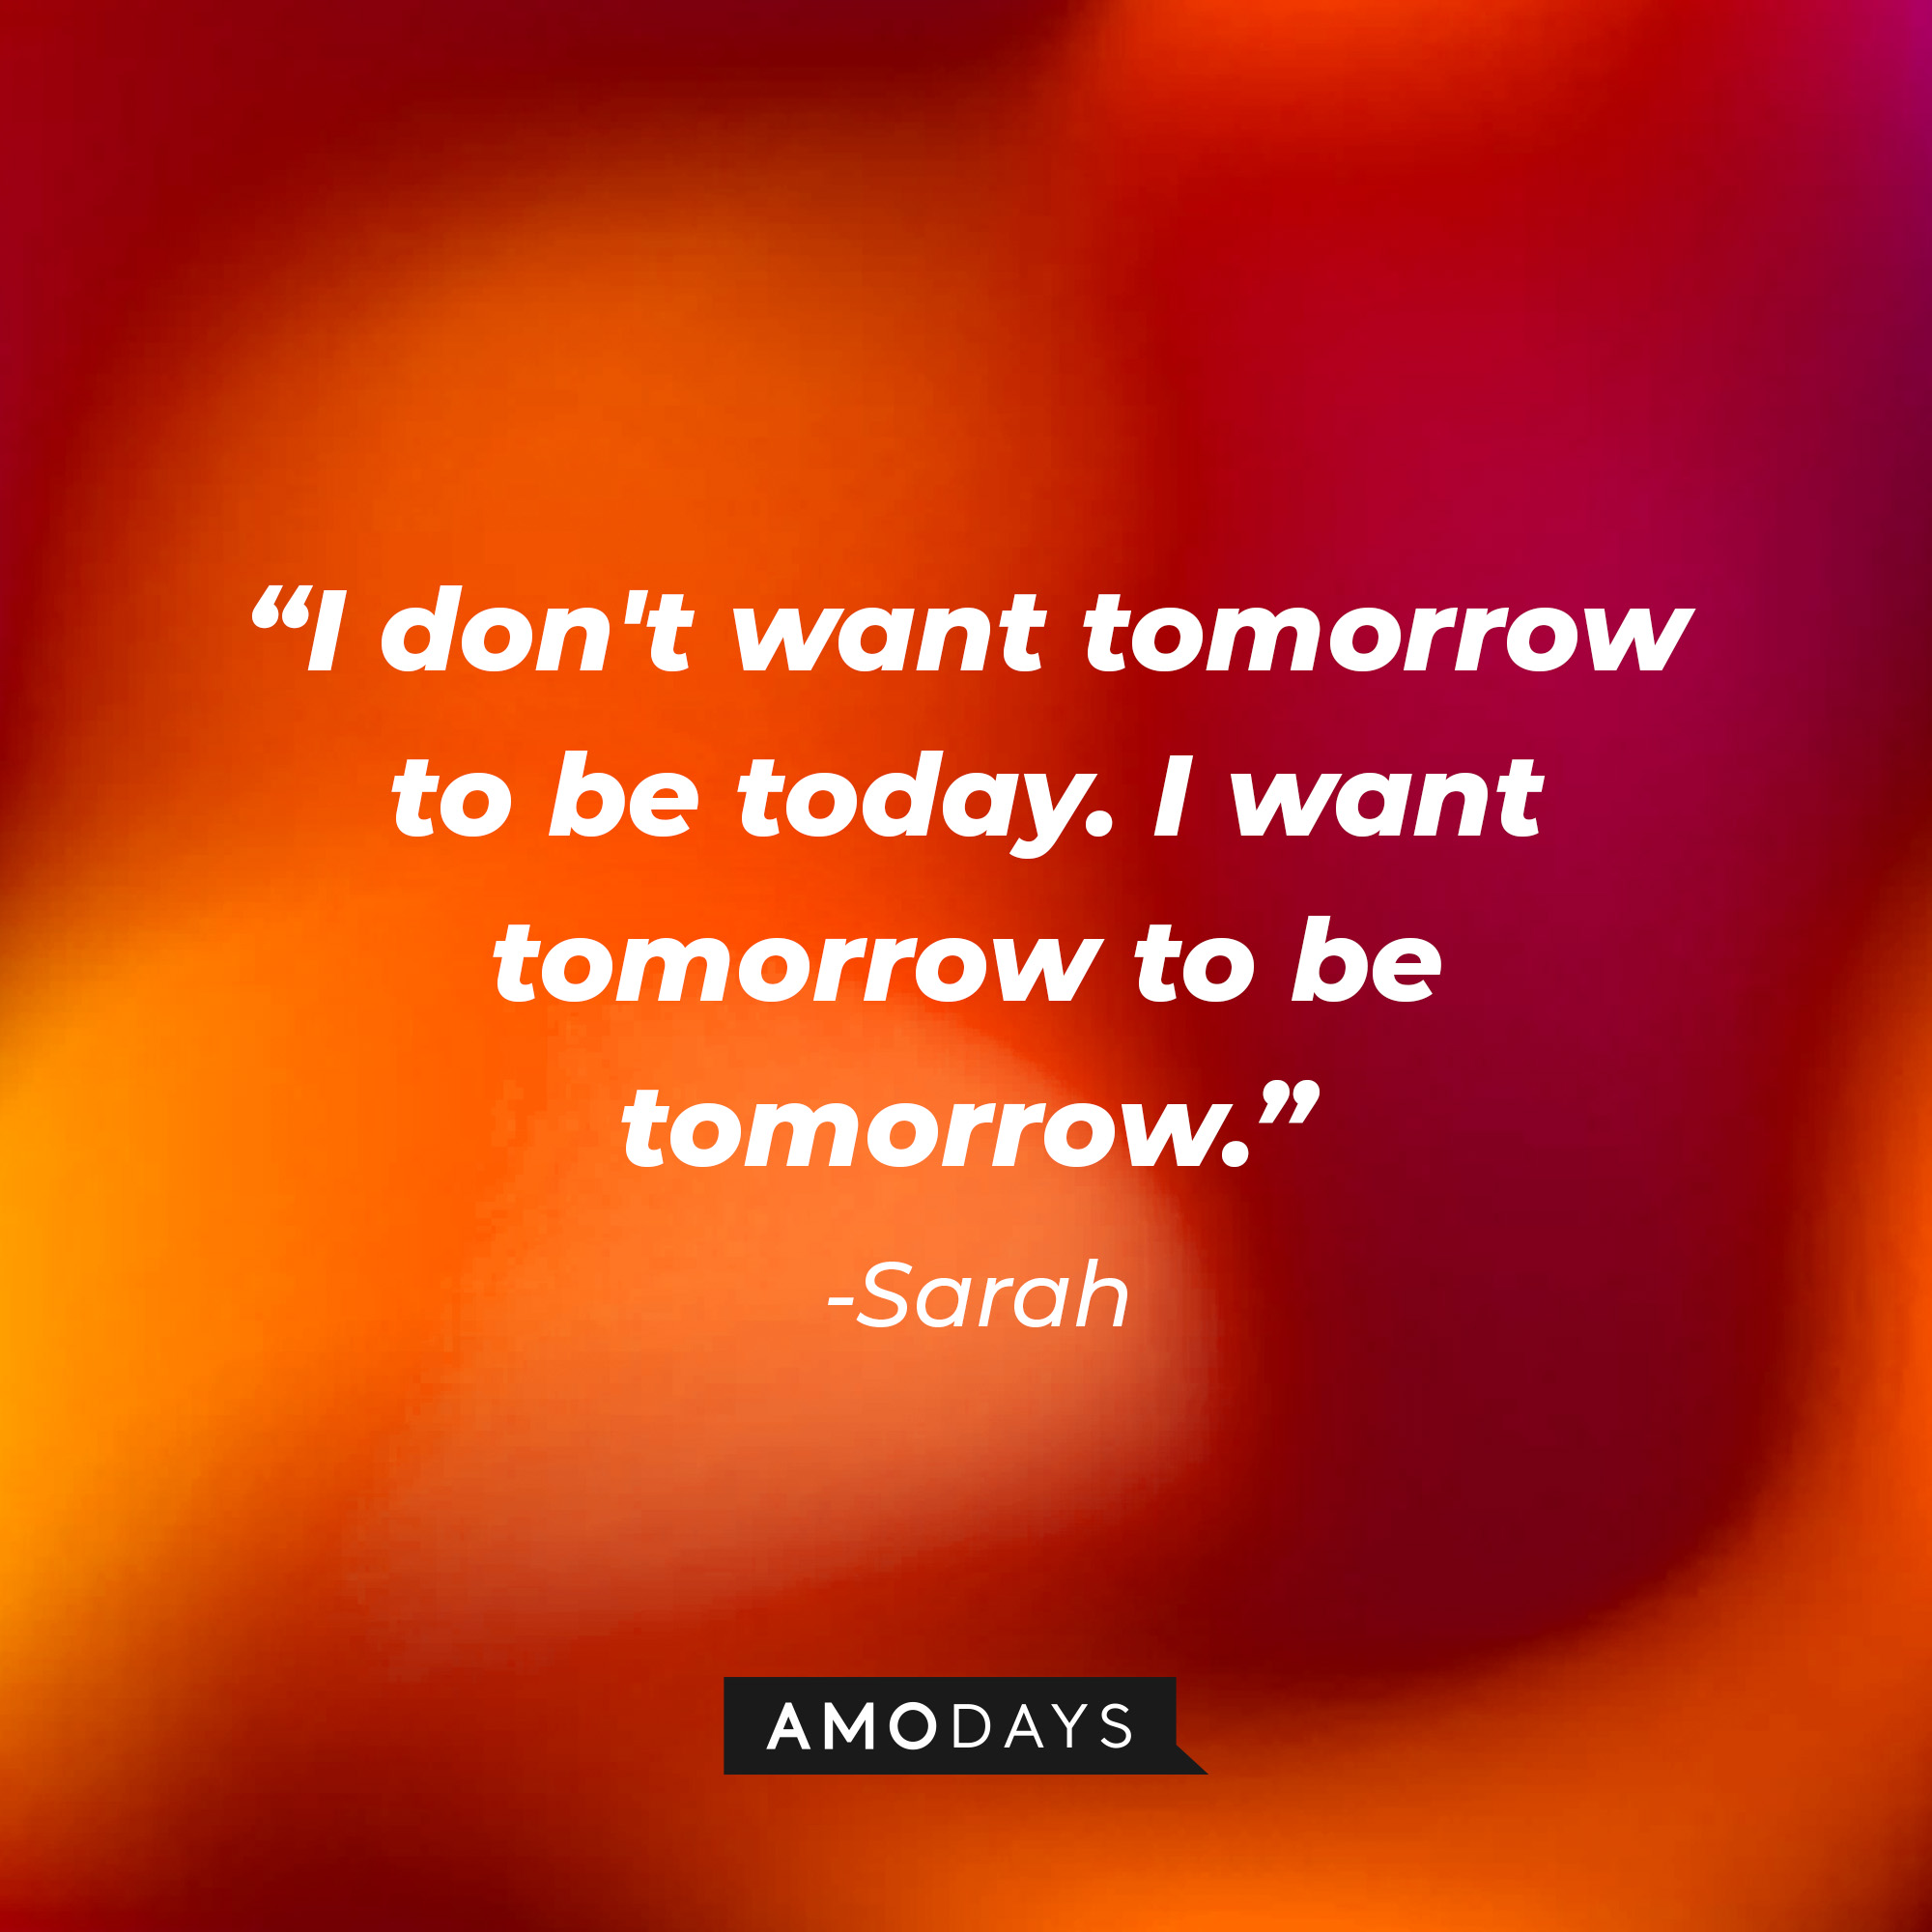 Sarahs’ quote: “I don't want tomorrow to be today. I want tomorrow to be tomorrow.” │ Source: AmoDays